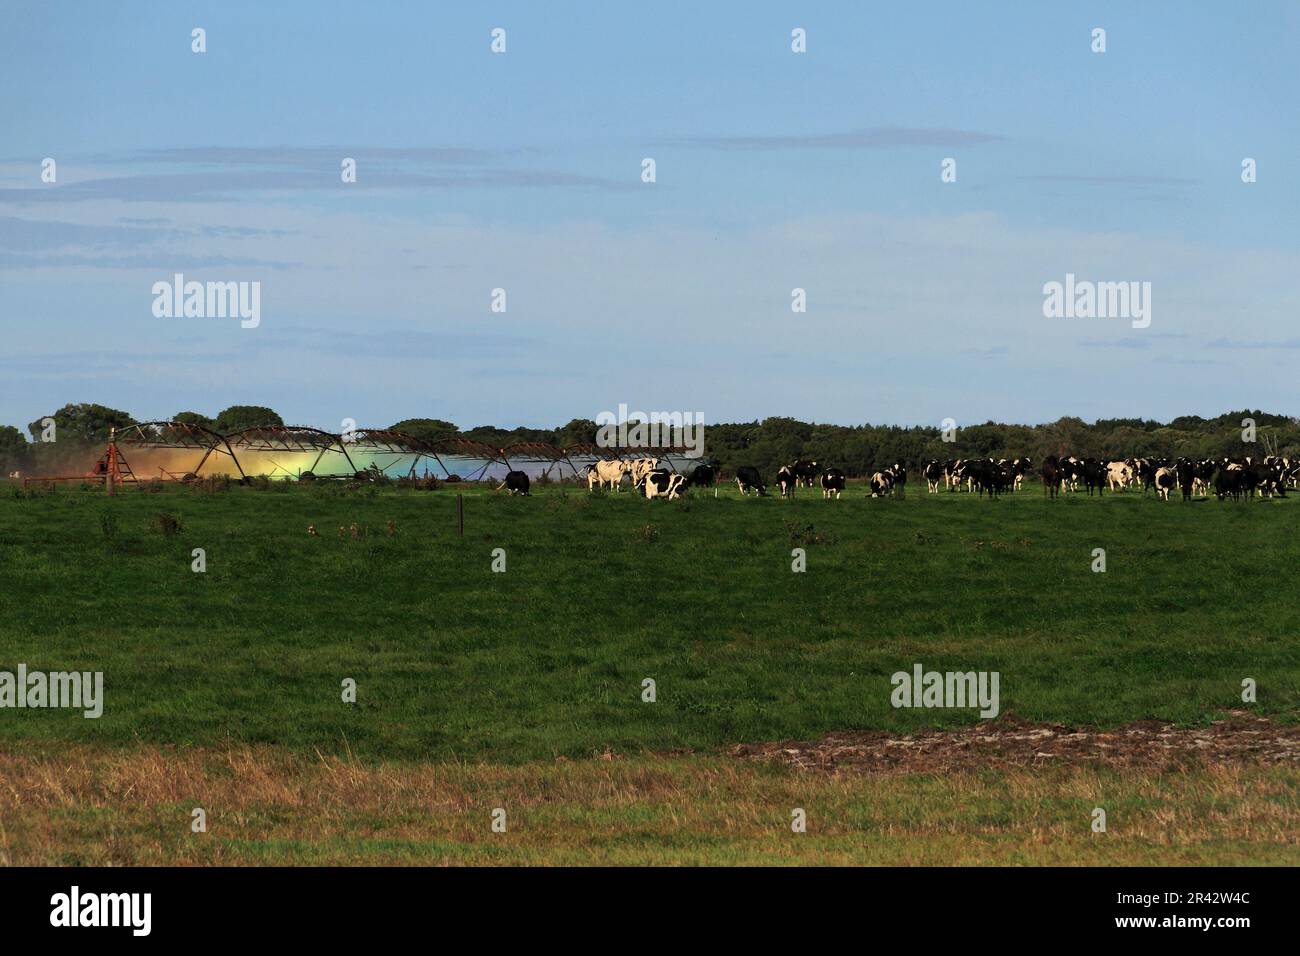 Cows in a field that is being watered by industrial sprinklers, Augusta,  Southwest Australia Stock Photo